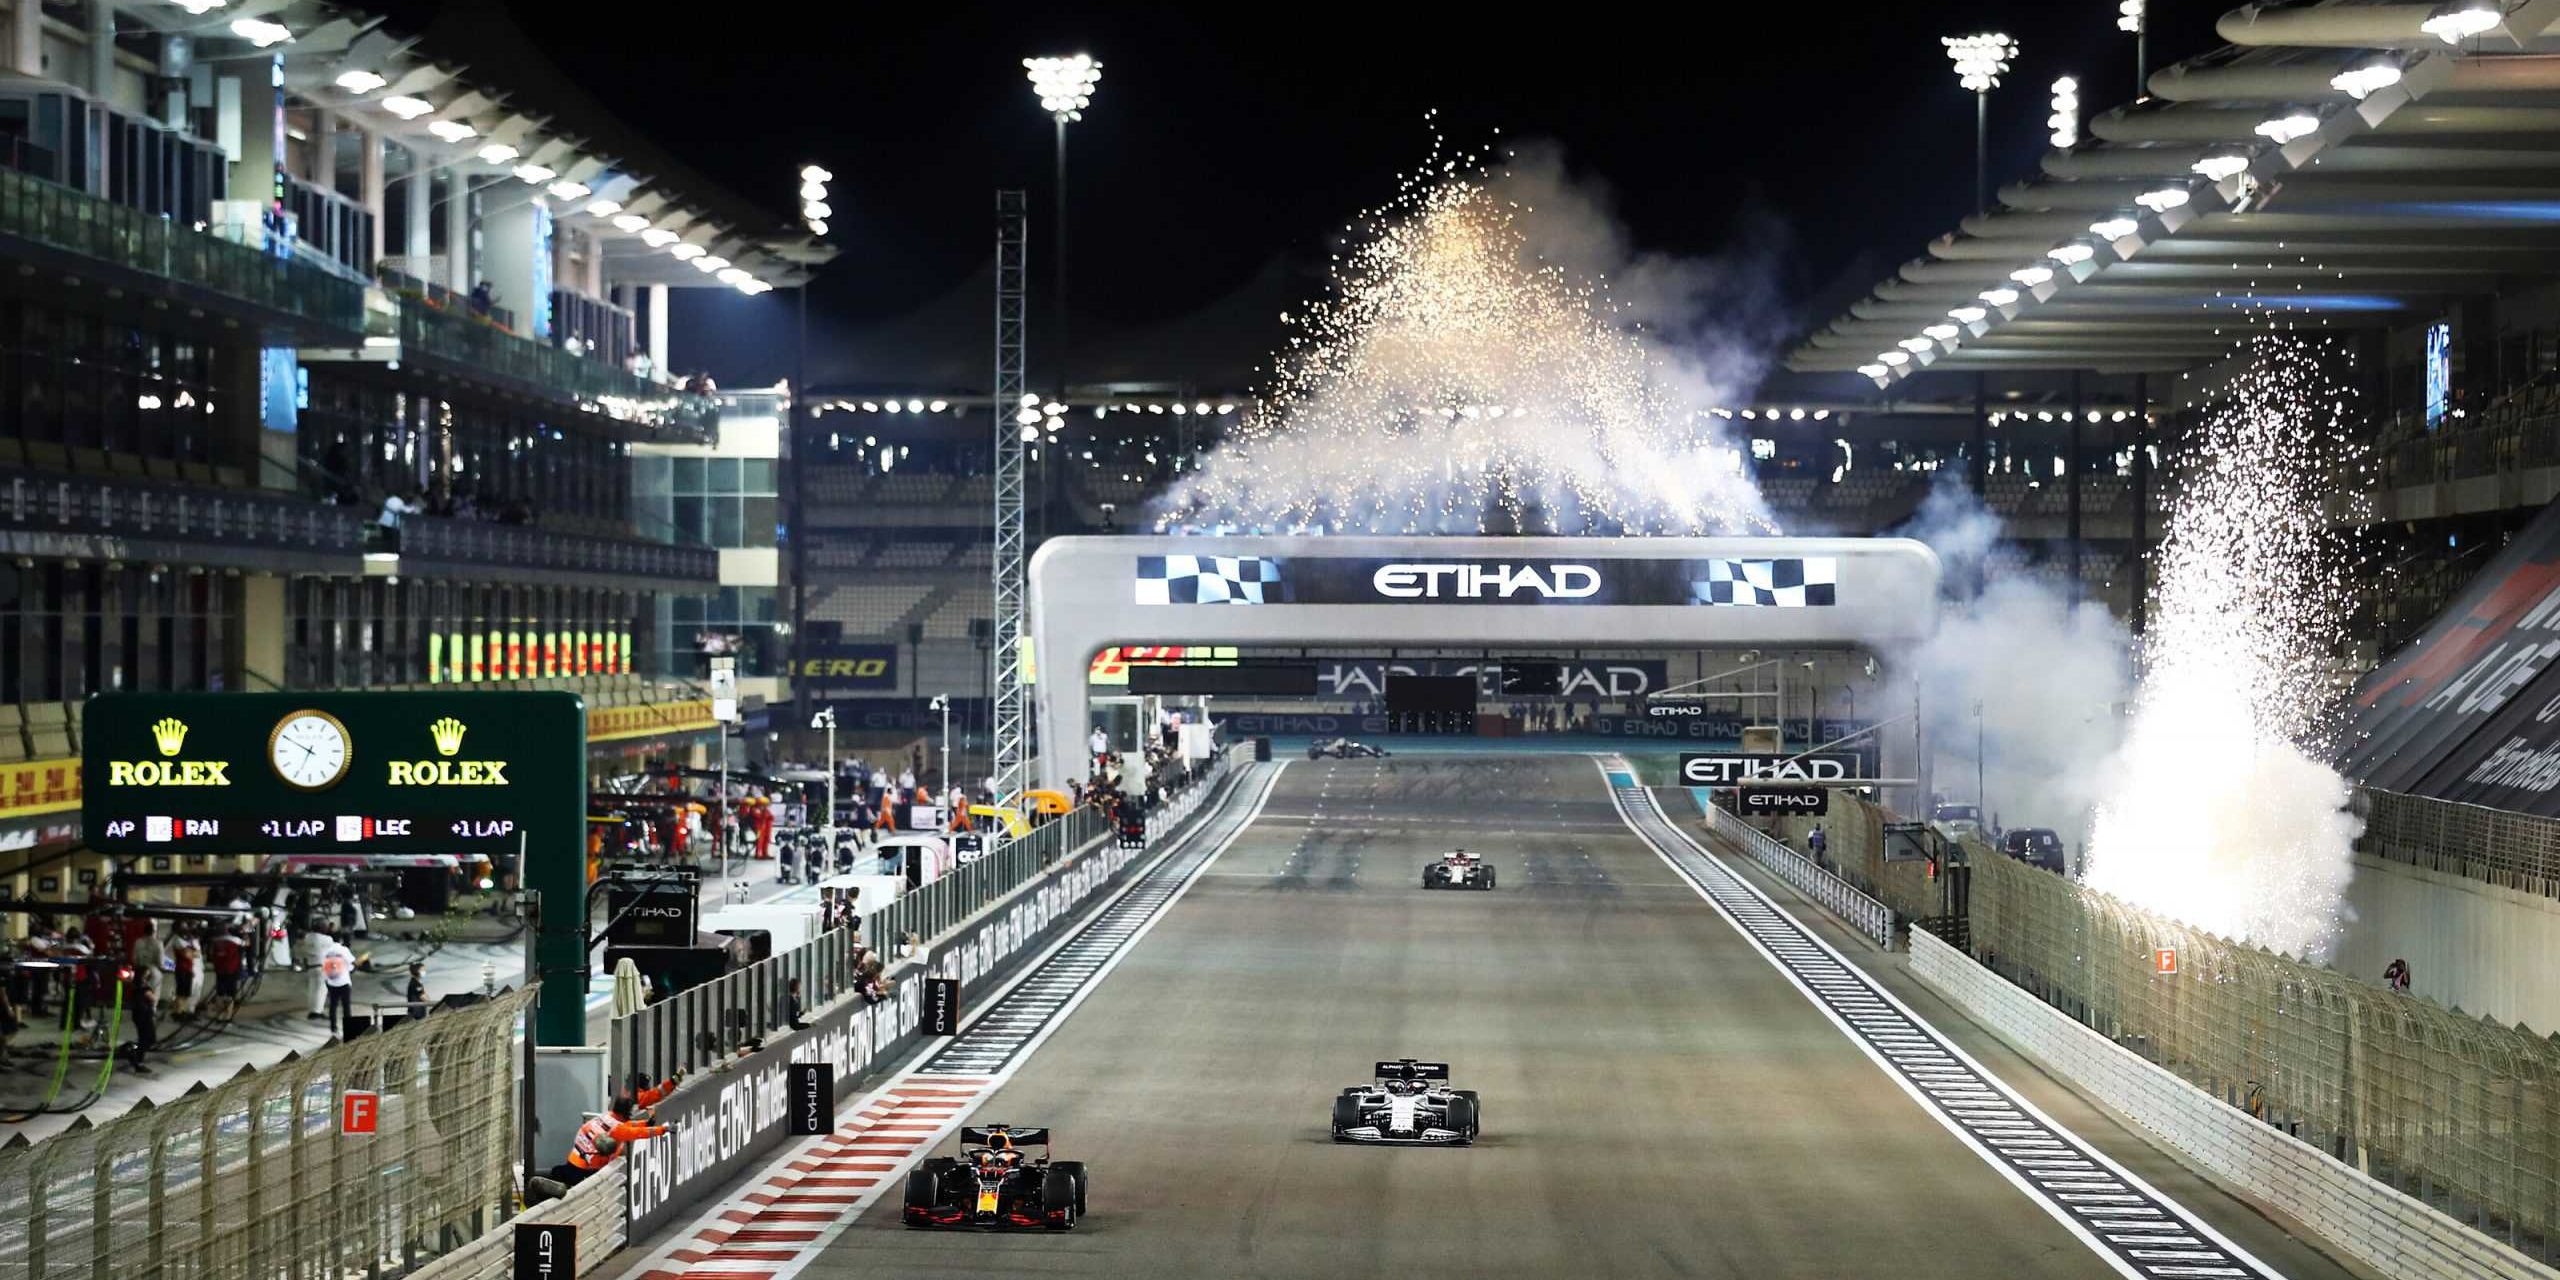 ABU DHABI, UNITED ARAB EMIRATES - DECEMBER 13: Fireworks go off as race winner Max Verstappen of the Netherlands driving the (33) Aston Martin Red Bull Racing RB16 crosses the line during the F1 Grand Prix of Abu Dhabi at Yas Marina Circuit on December 13, 2020 in Abu Dhabi, United Arab Emirates. (Photo by Bryn Lennon/Getty Images) // Getty Images / Red Bull Content Pool // SI202012130552 // Usage for editorial use only //